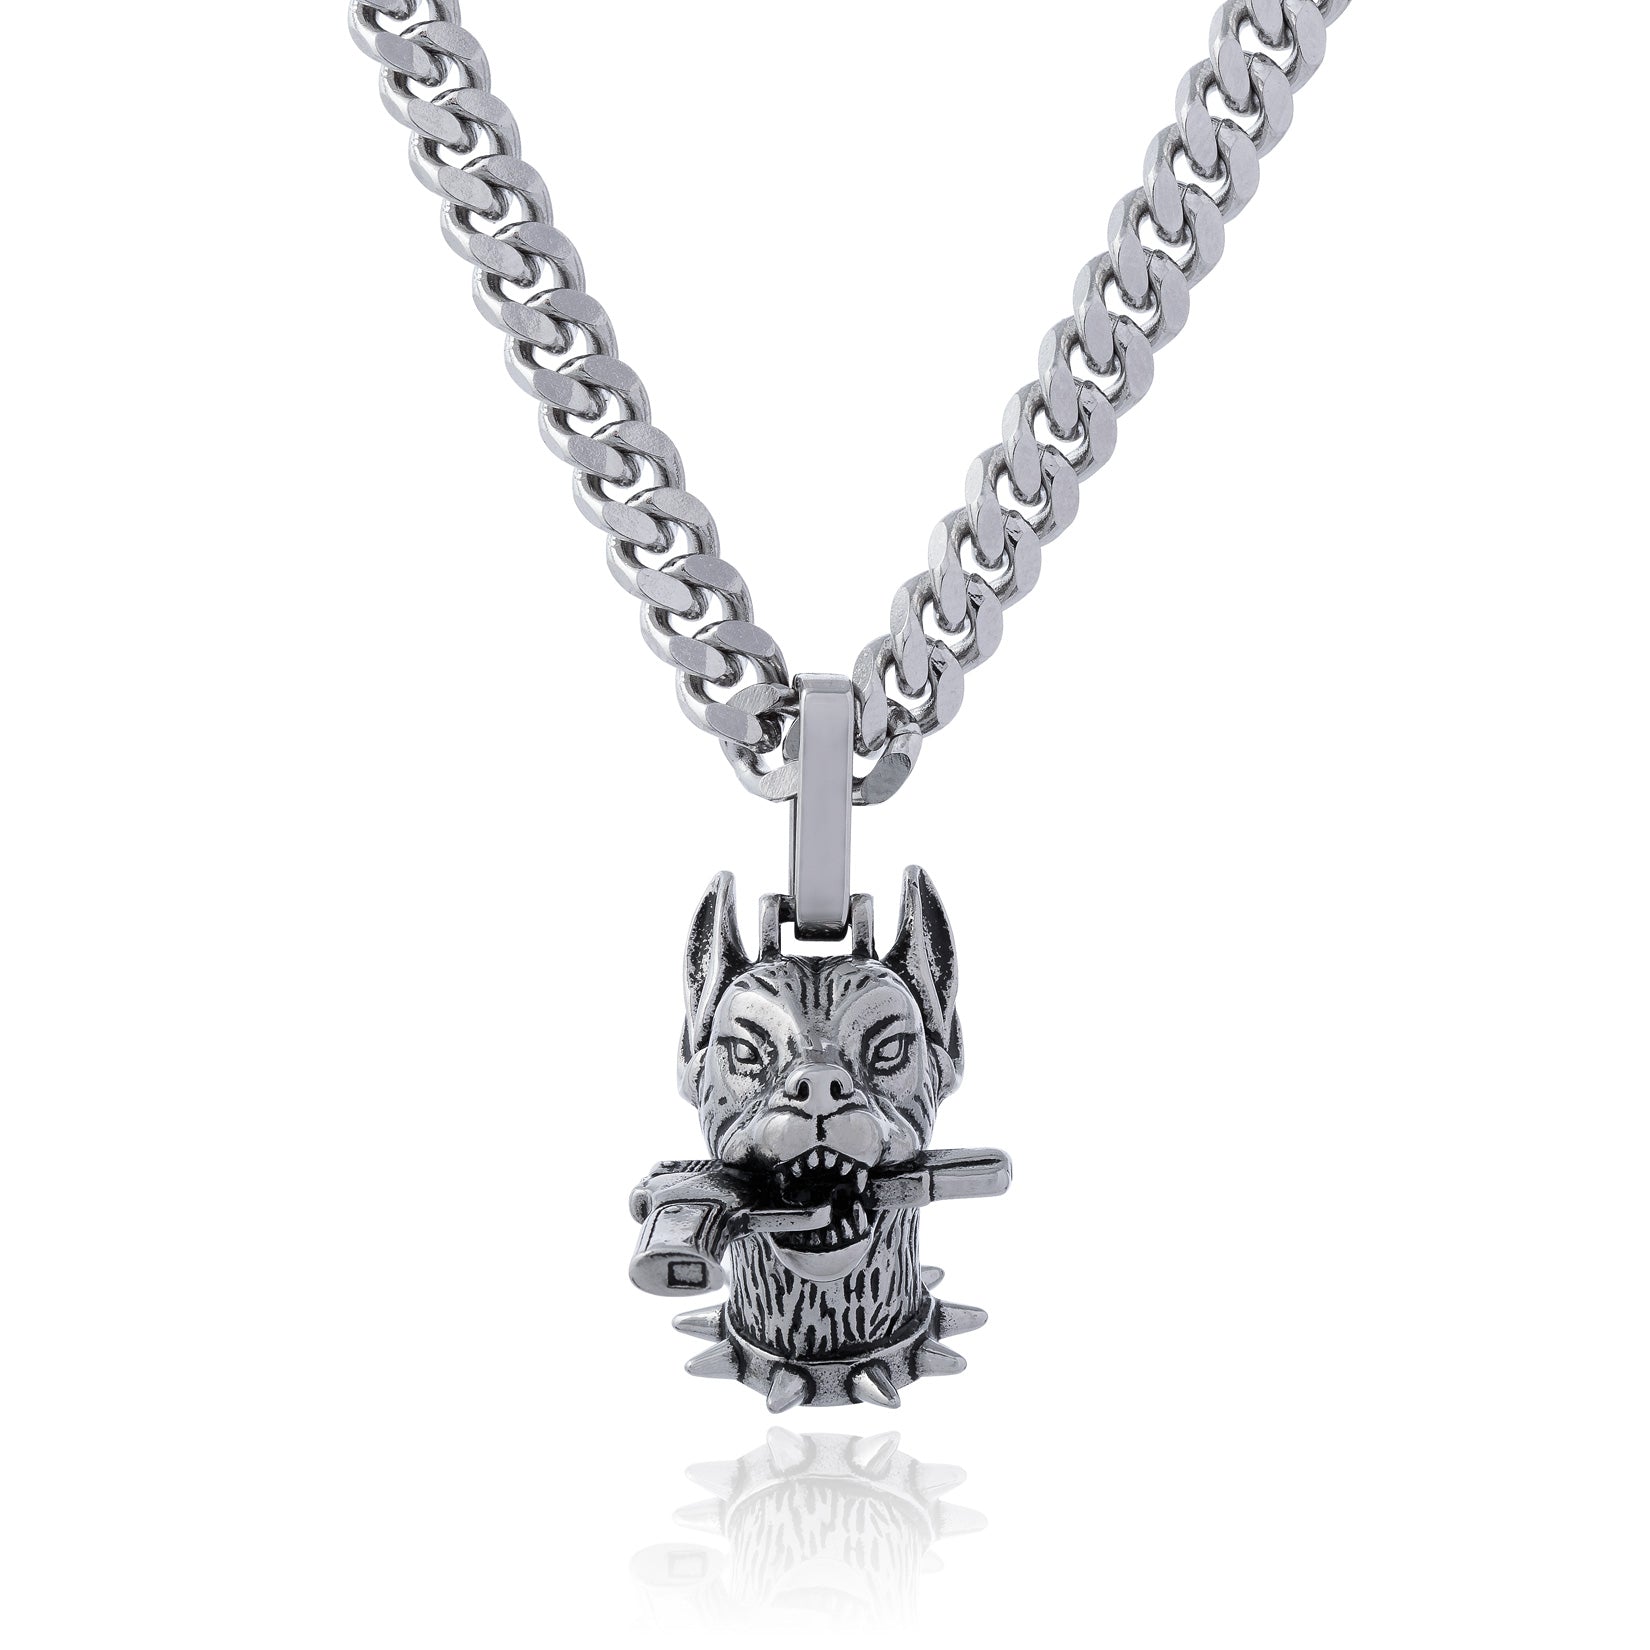 Statement Collective - "The Guard Dog" Pendant Necklace